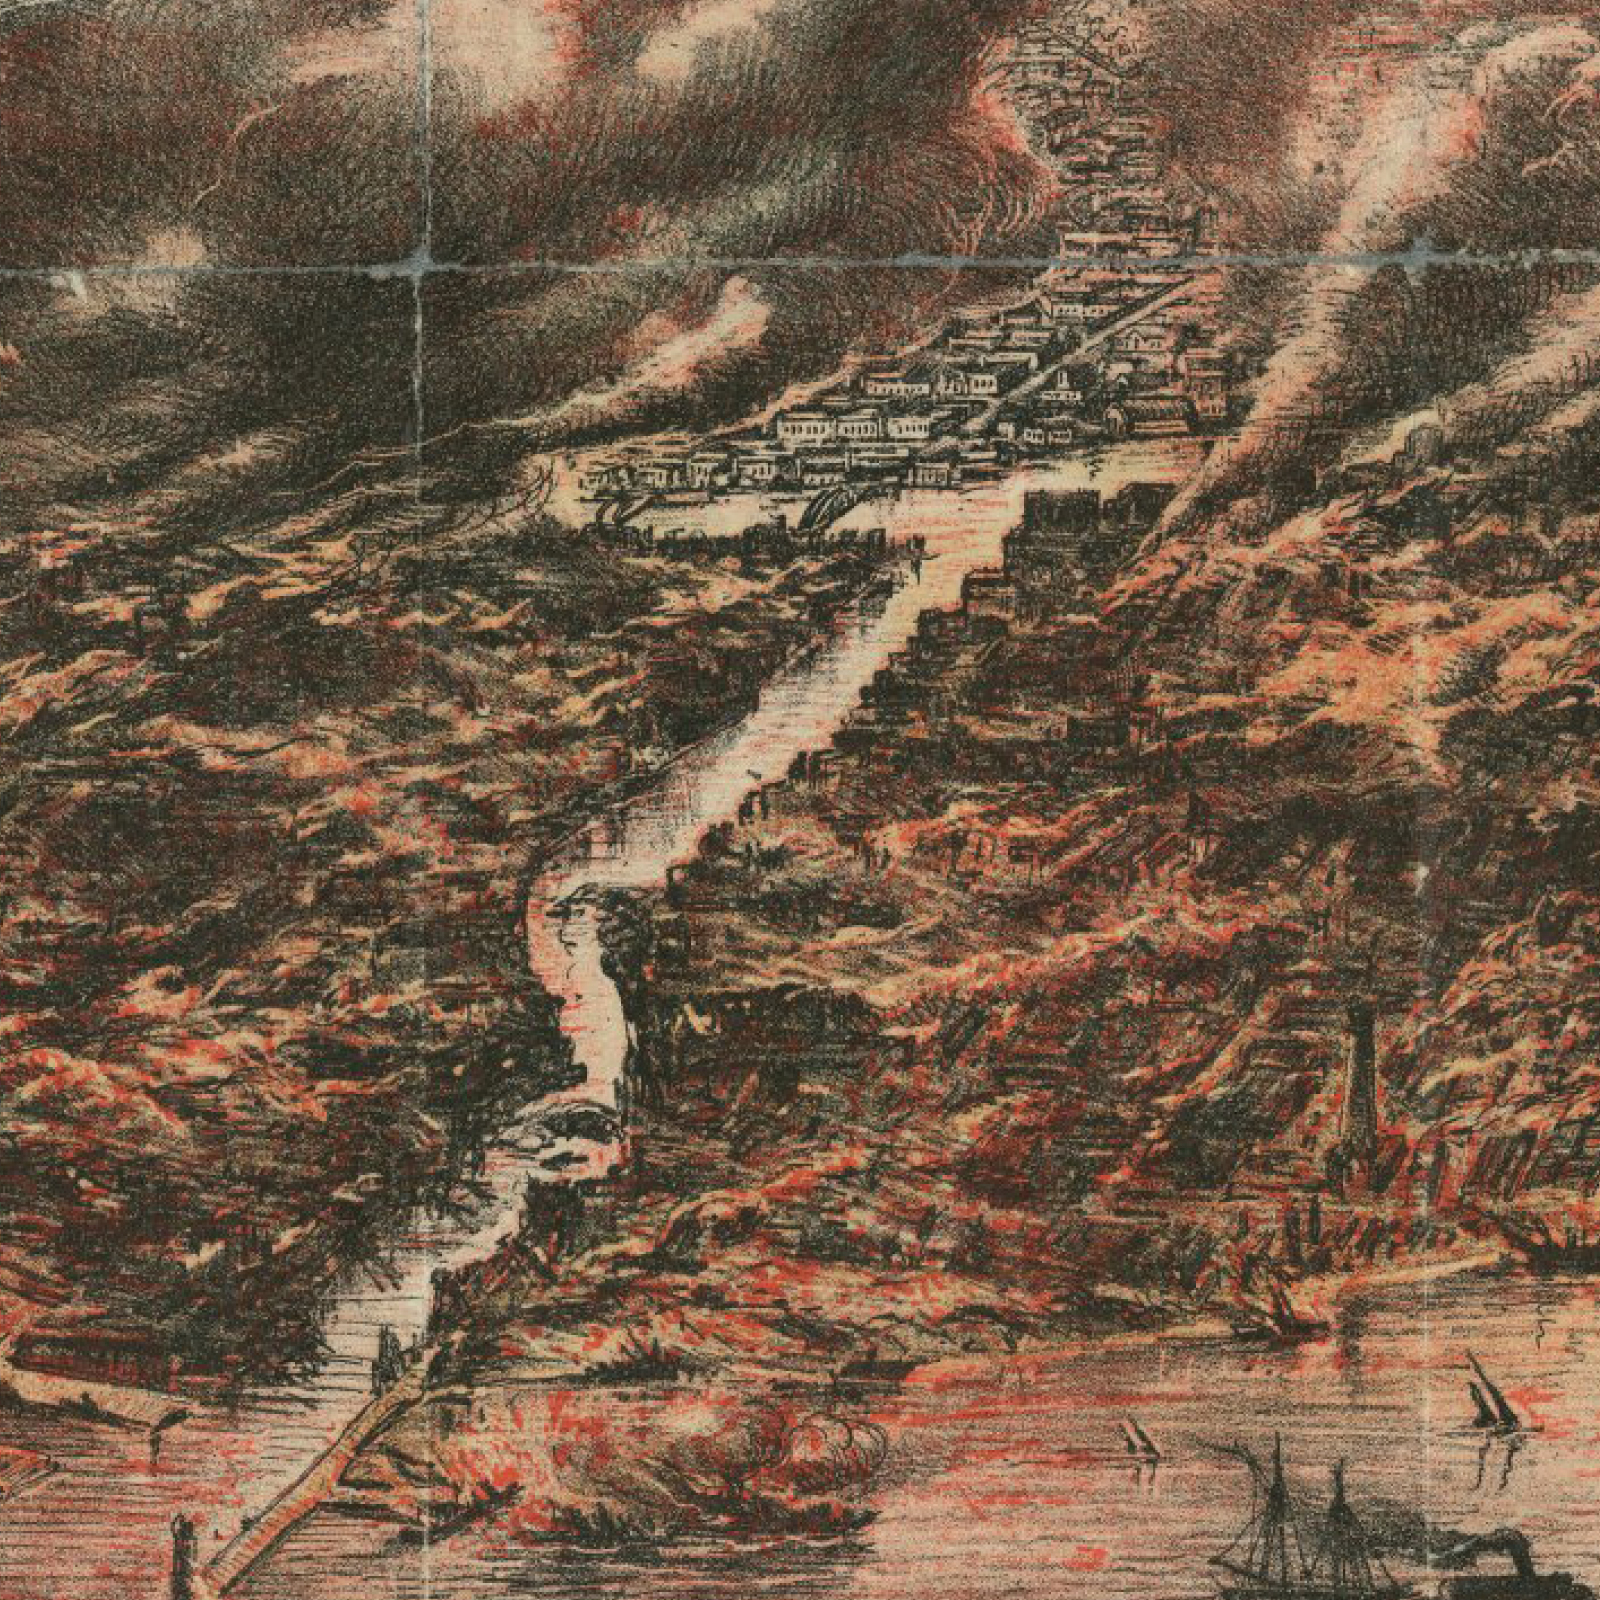 Detail of the Great Chicago Fire of 1871, from Richard's Illustrated and Statistical Map of the Great Conflagration in Chicago (1871).